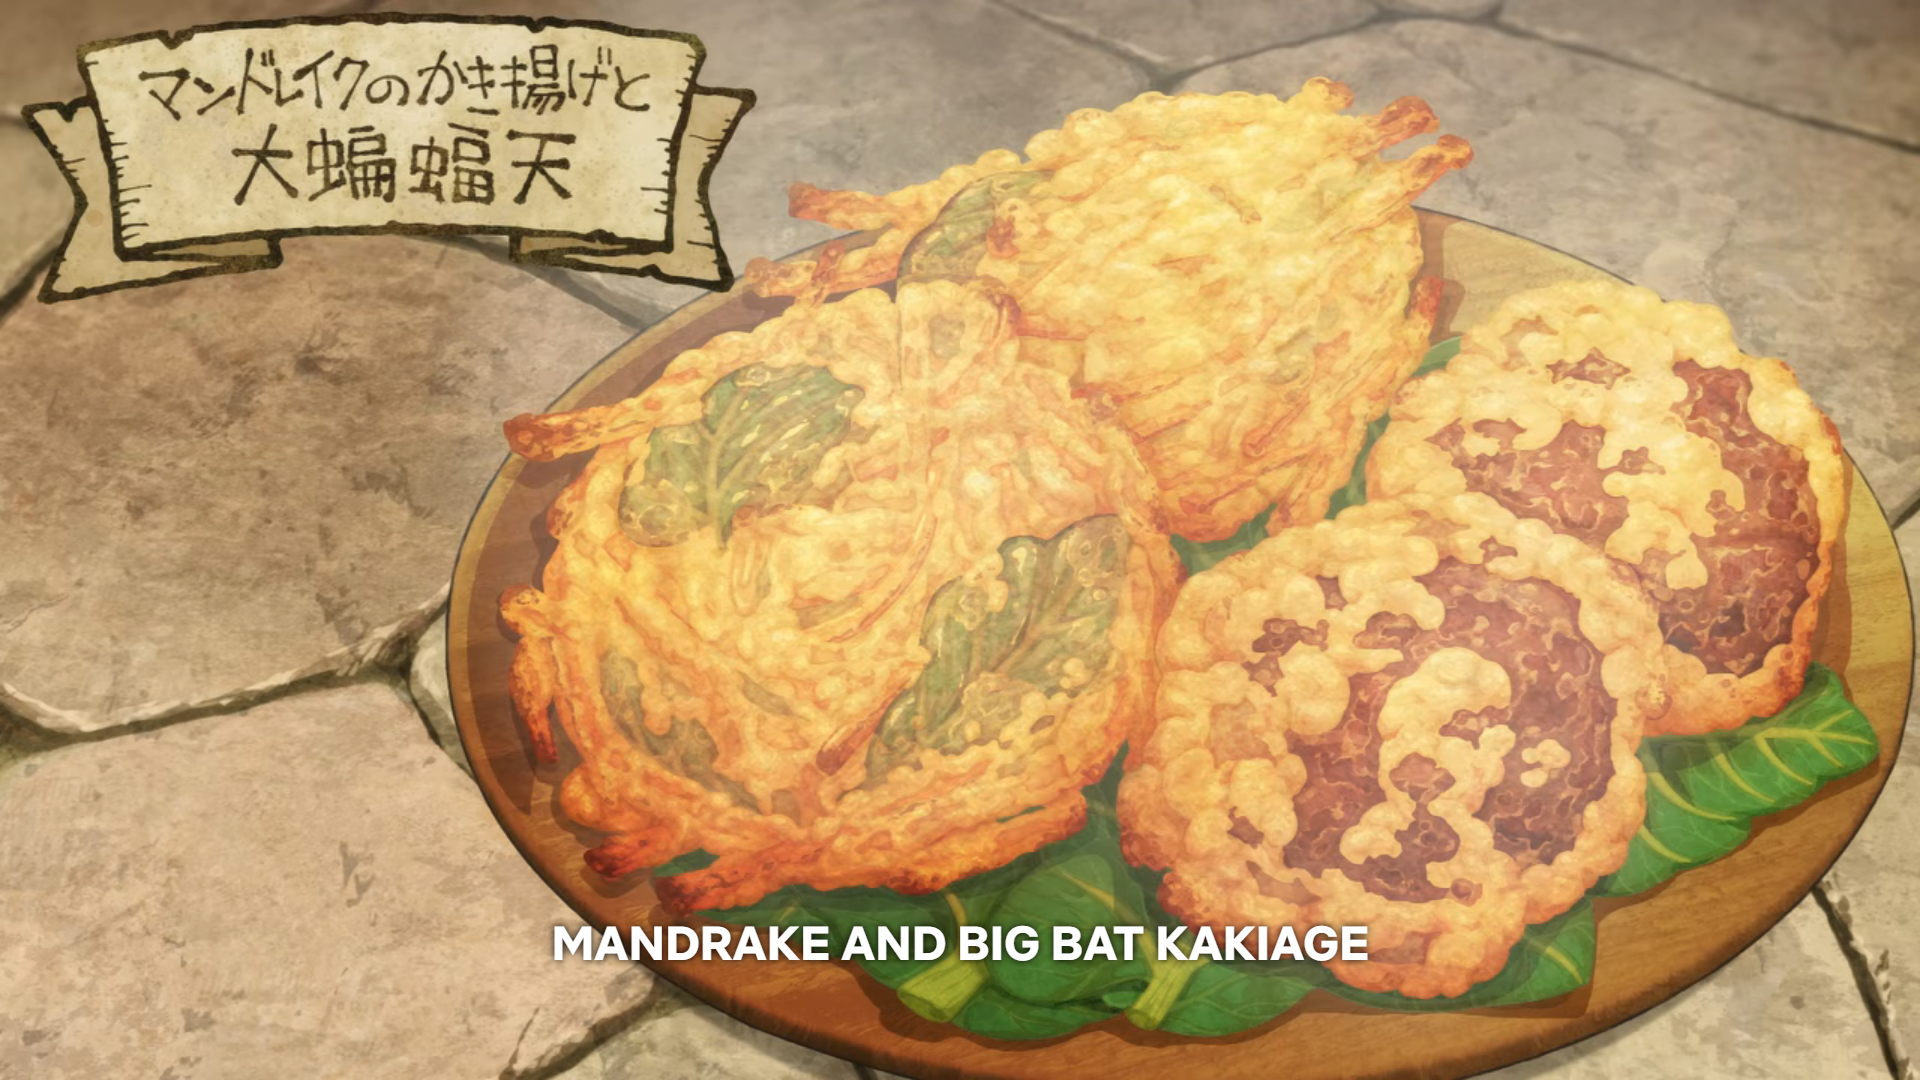 Delicious in Dungeon's second episode gives us an unconventional method of preparing mandrake and big bat kakiage. 